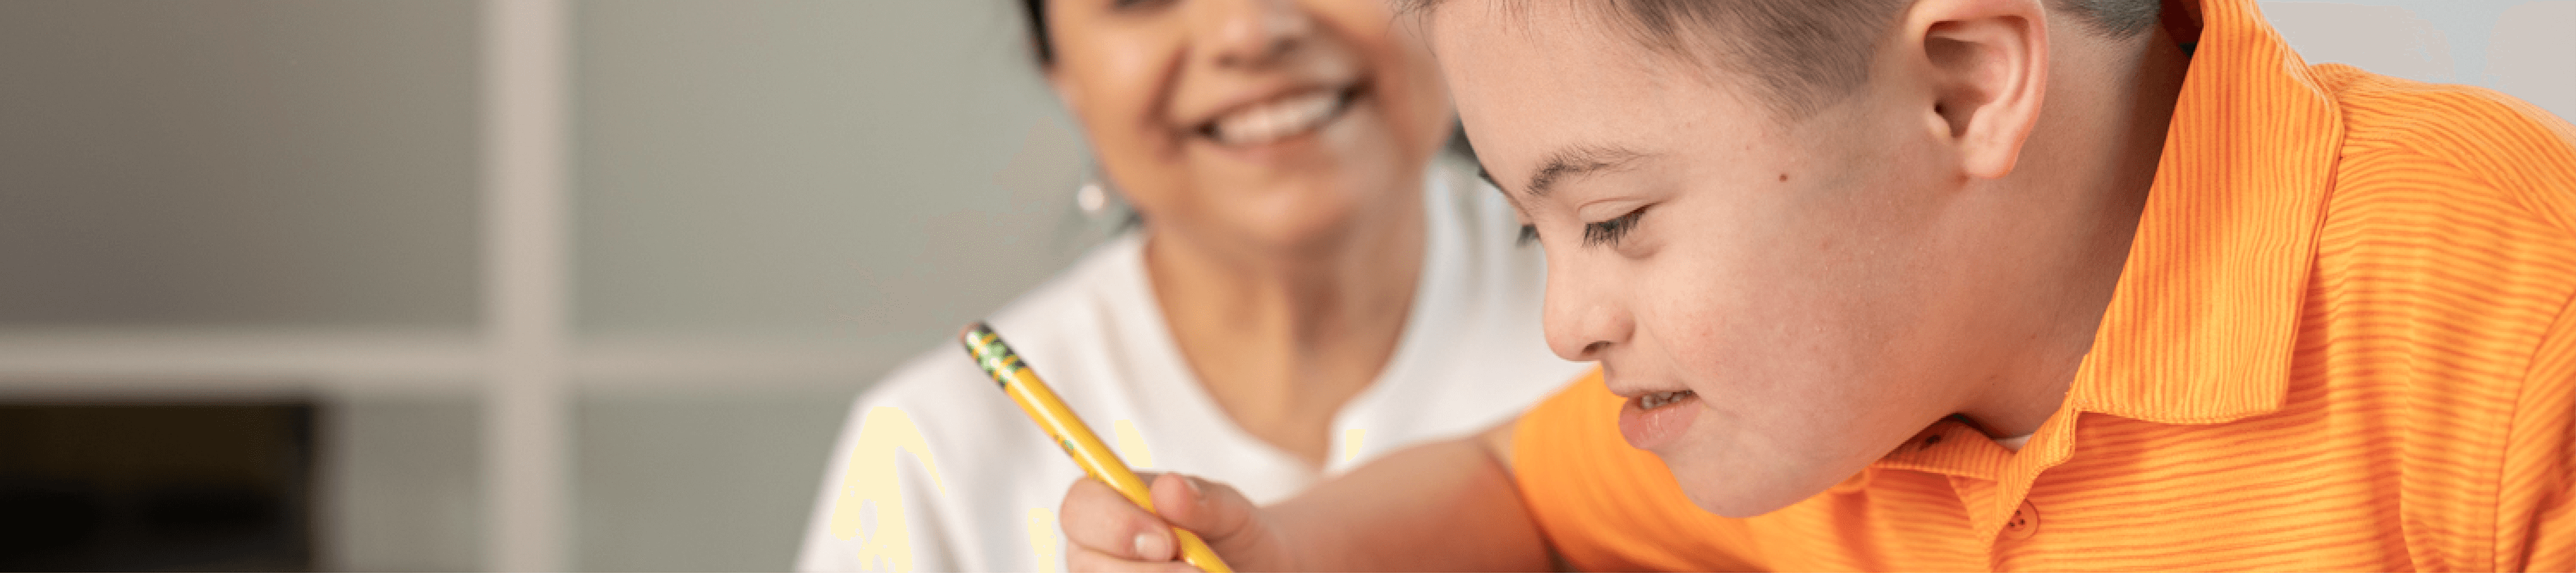 Grade schooler with Down syndrome does homework with mom